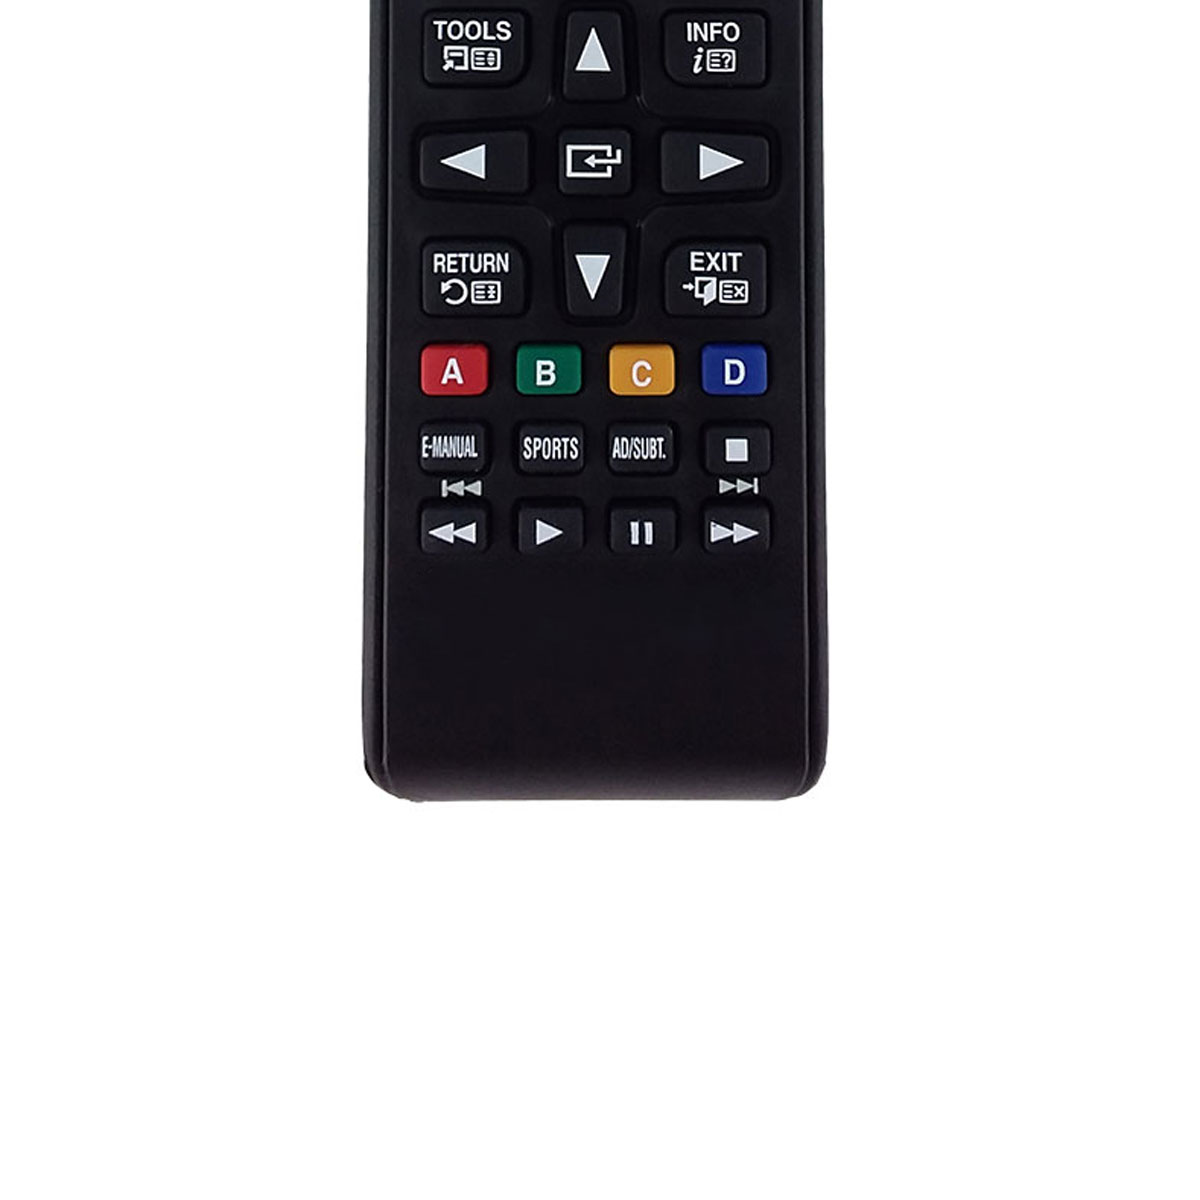 AuraBeam Replacement TV Remote Control for Samsung CL21N11MQUXXAZ Television